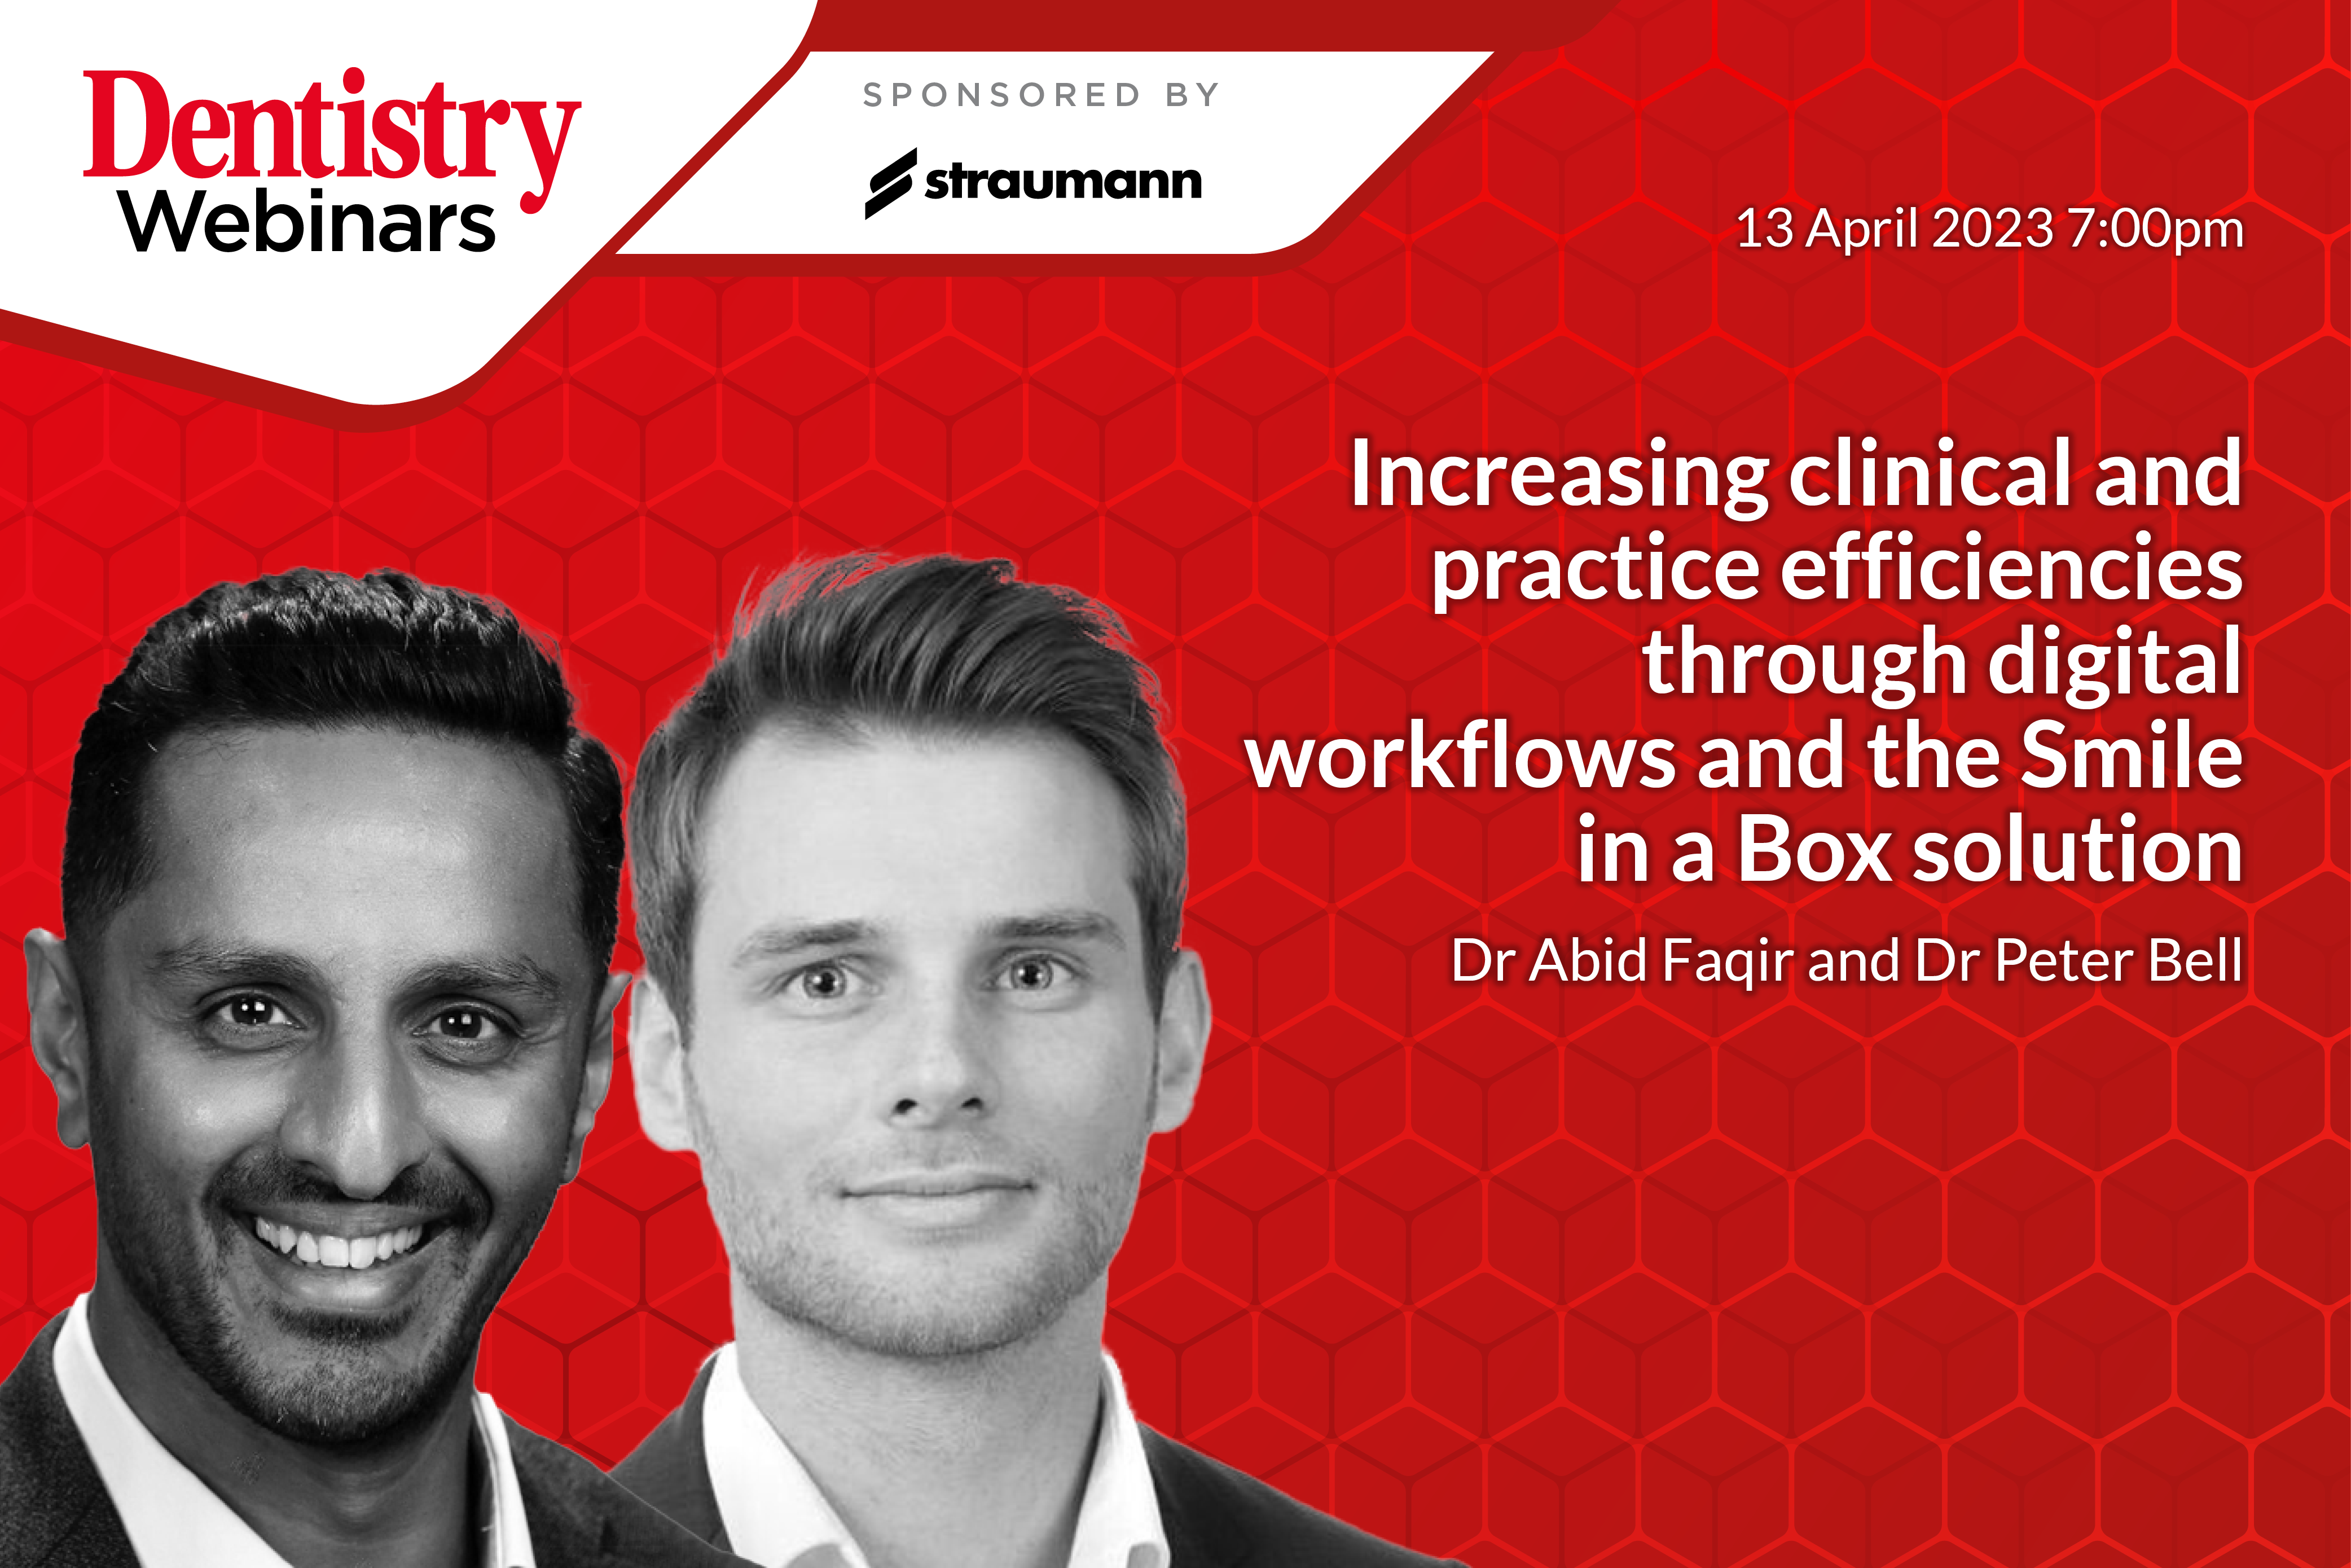 Join Abid Faqir and Peter Bell on Thursday 13 April at 7pm as they discuss increasing clinical and practice efficiencies through digital workflows and the Smile in a Box solution.